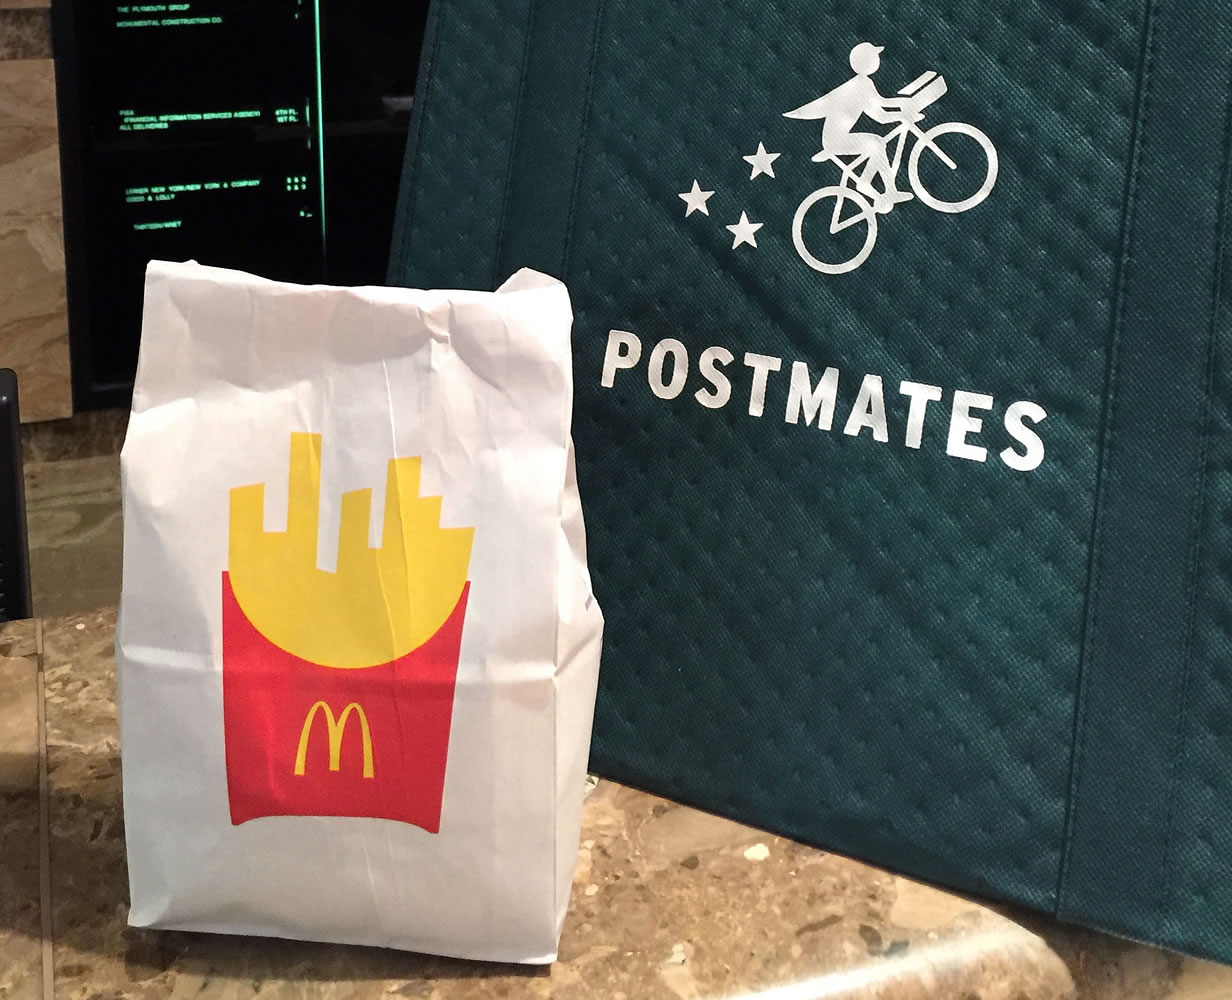 A bag of food from McDonald's ordered through the Postmates service sits next to a Postmates delivery bag during a delivery in New York on Wednesday.